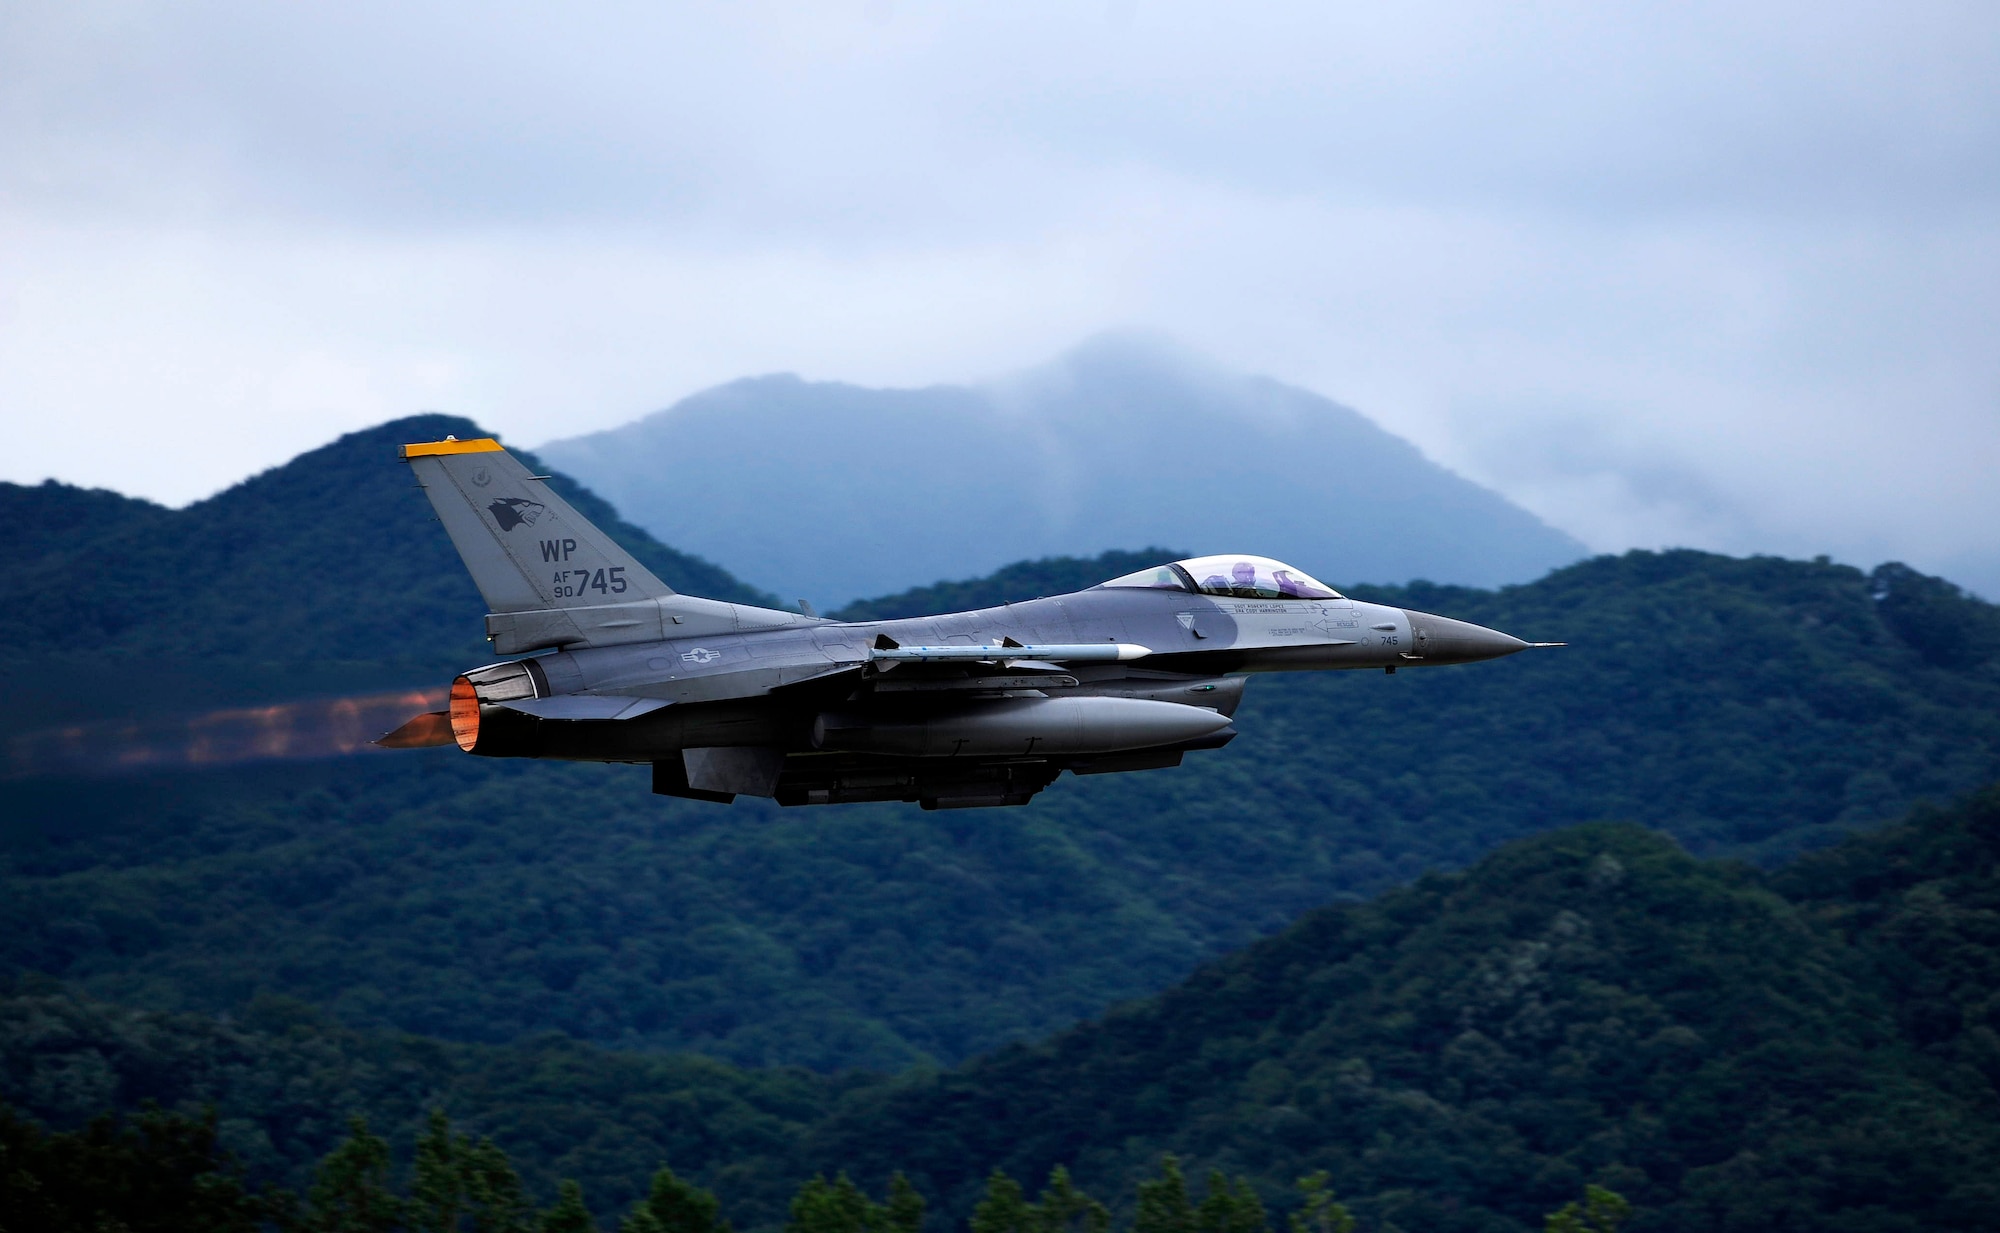 An F-16 Fighting Falcon from the 80th Fighter Squadron at Kunsan Air Base, South Korea, takes off at Jungwon AB, South Korea, during Buddy Wing 15-6 on July 8, 2015. Buddy Wing exercises are conducted multiple times throughout the year to sharpen interoperability between U.S. and South Korean forces so, if the need arises, they are always ready to fight as a combined force. (U.S. Air Force photo/Staff Sgt. Nick Wilson) 